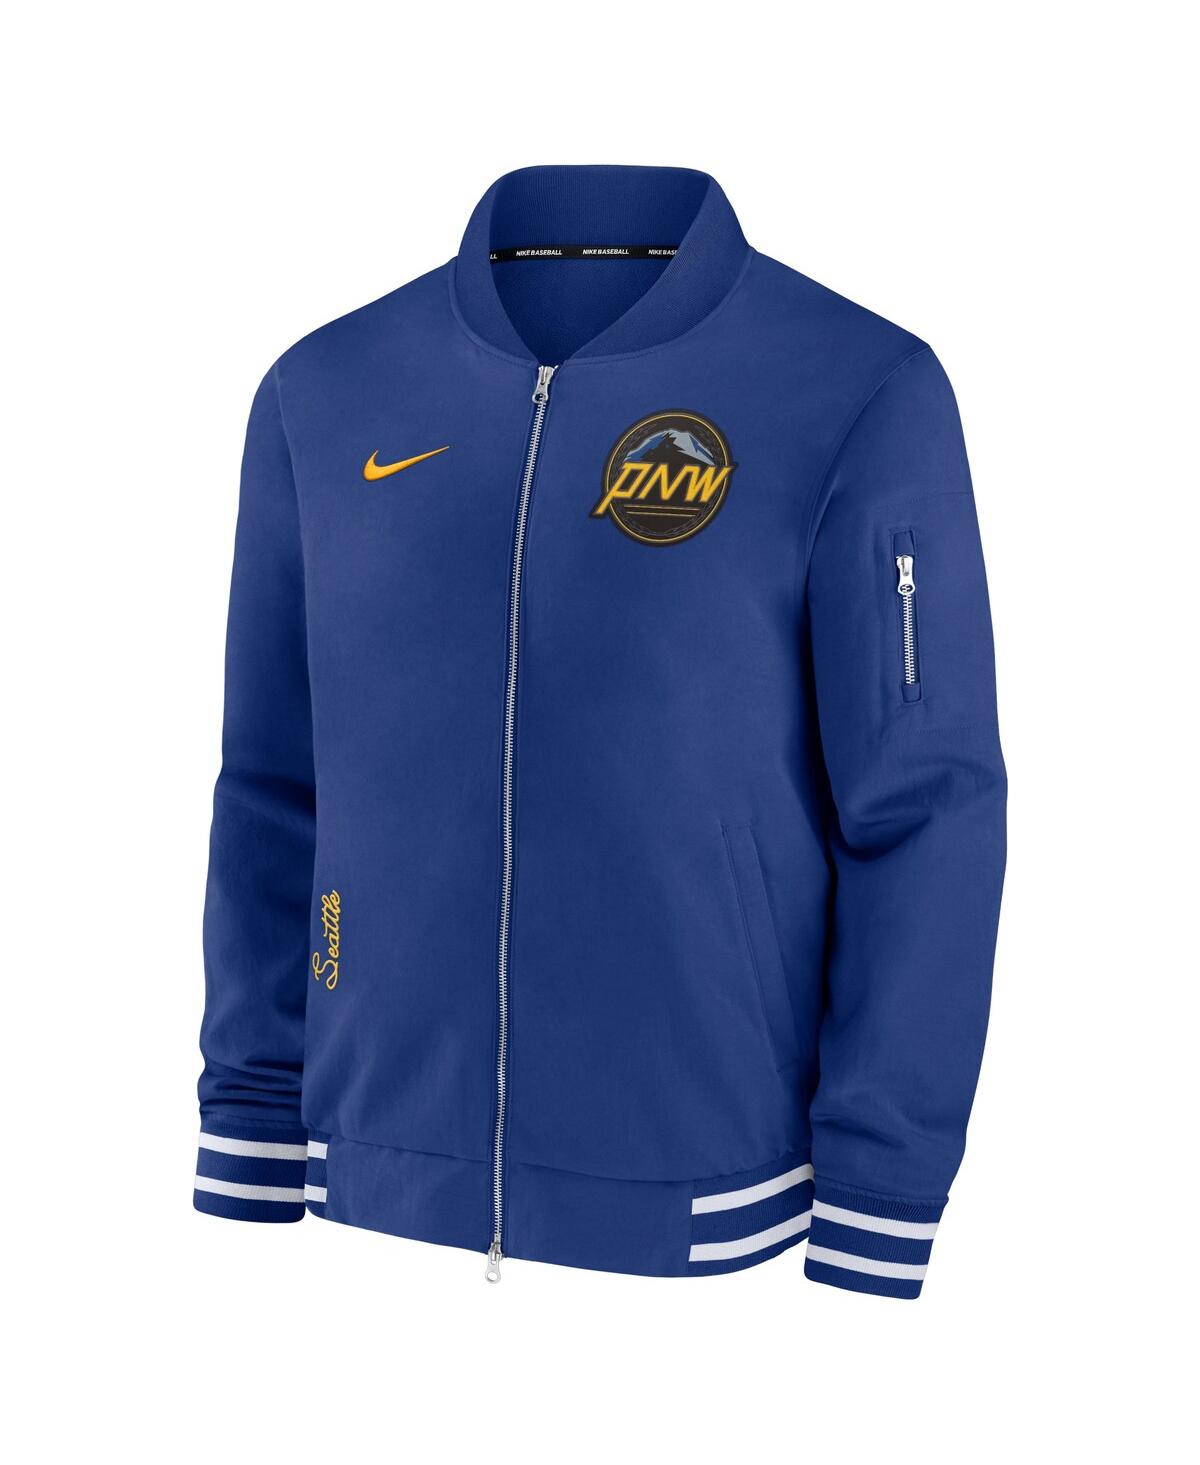 Shop Nike Men's  Royal Seattle Mariners Authentic Collection Game Time Bomber Full-zip Jacket